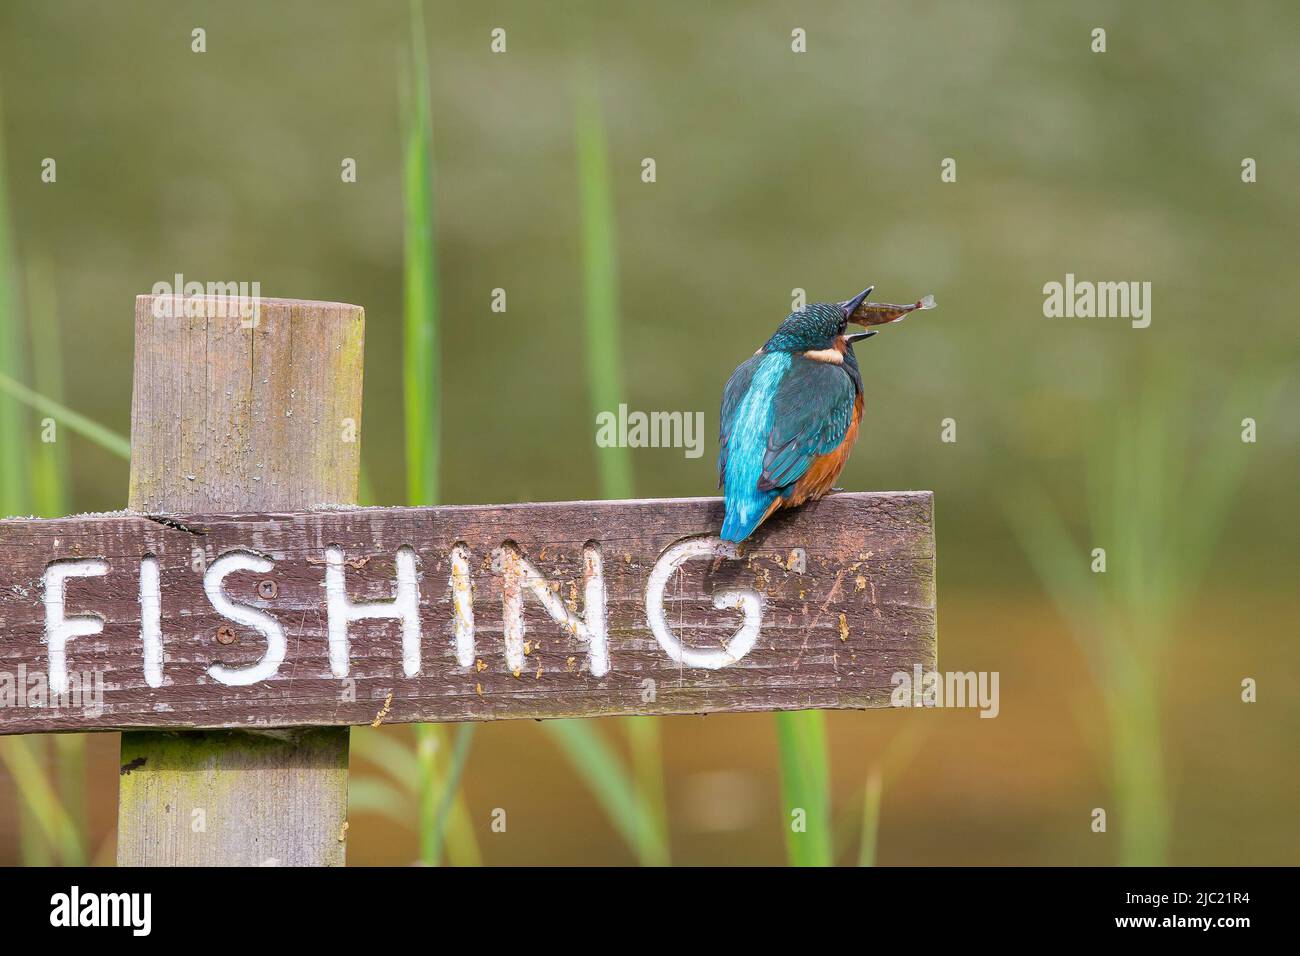 Kidderminster, UK. 9th June. 2022. UK weather: with a sunny start, today is a perfect day for a spot of fishing. A slight breeze keeps this kingfisher on his toes  as he indulges in a little fishing. A kingfisher bird plays with a fish while perched on a 'no fishing' sign post before devouring his meal in one gulp. Credit: Lee Hudson/Alamy Live News Stock Photo